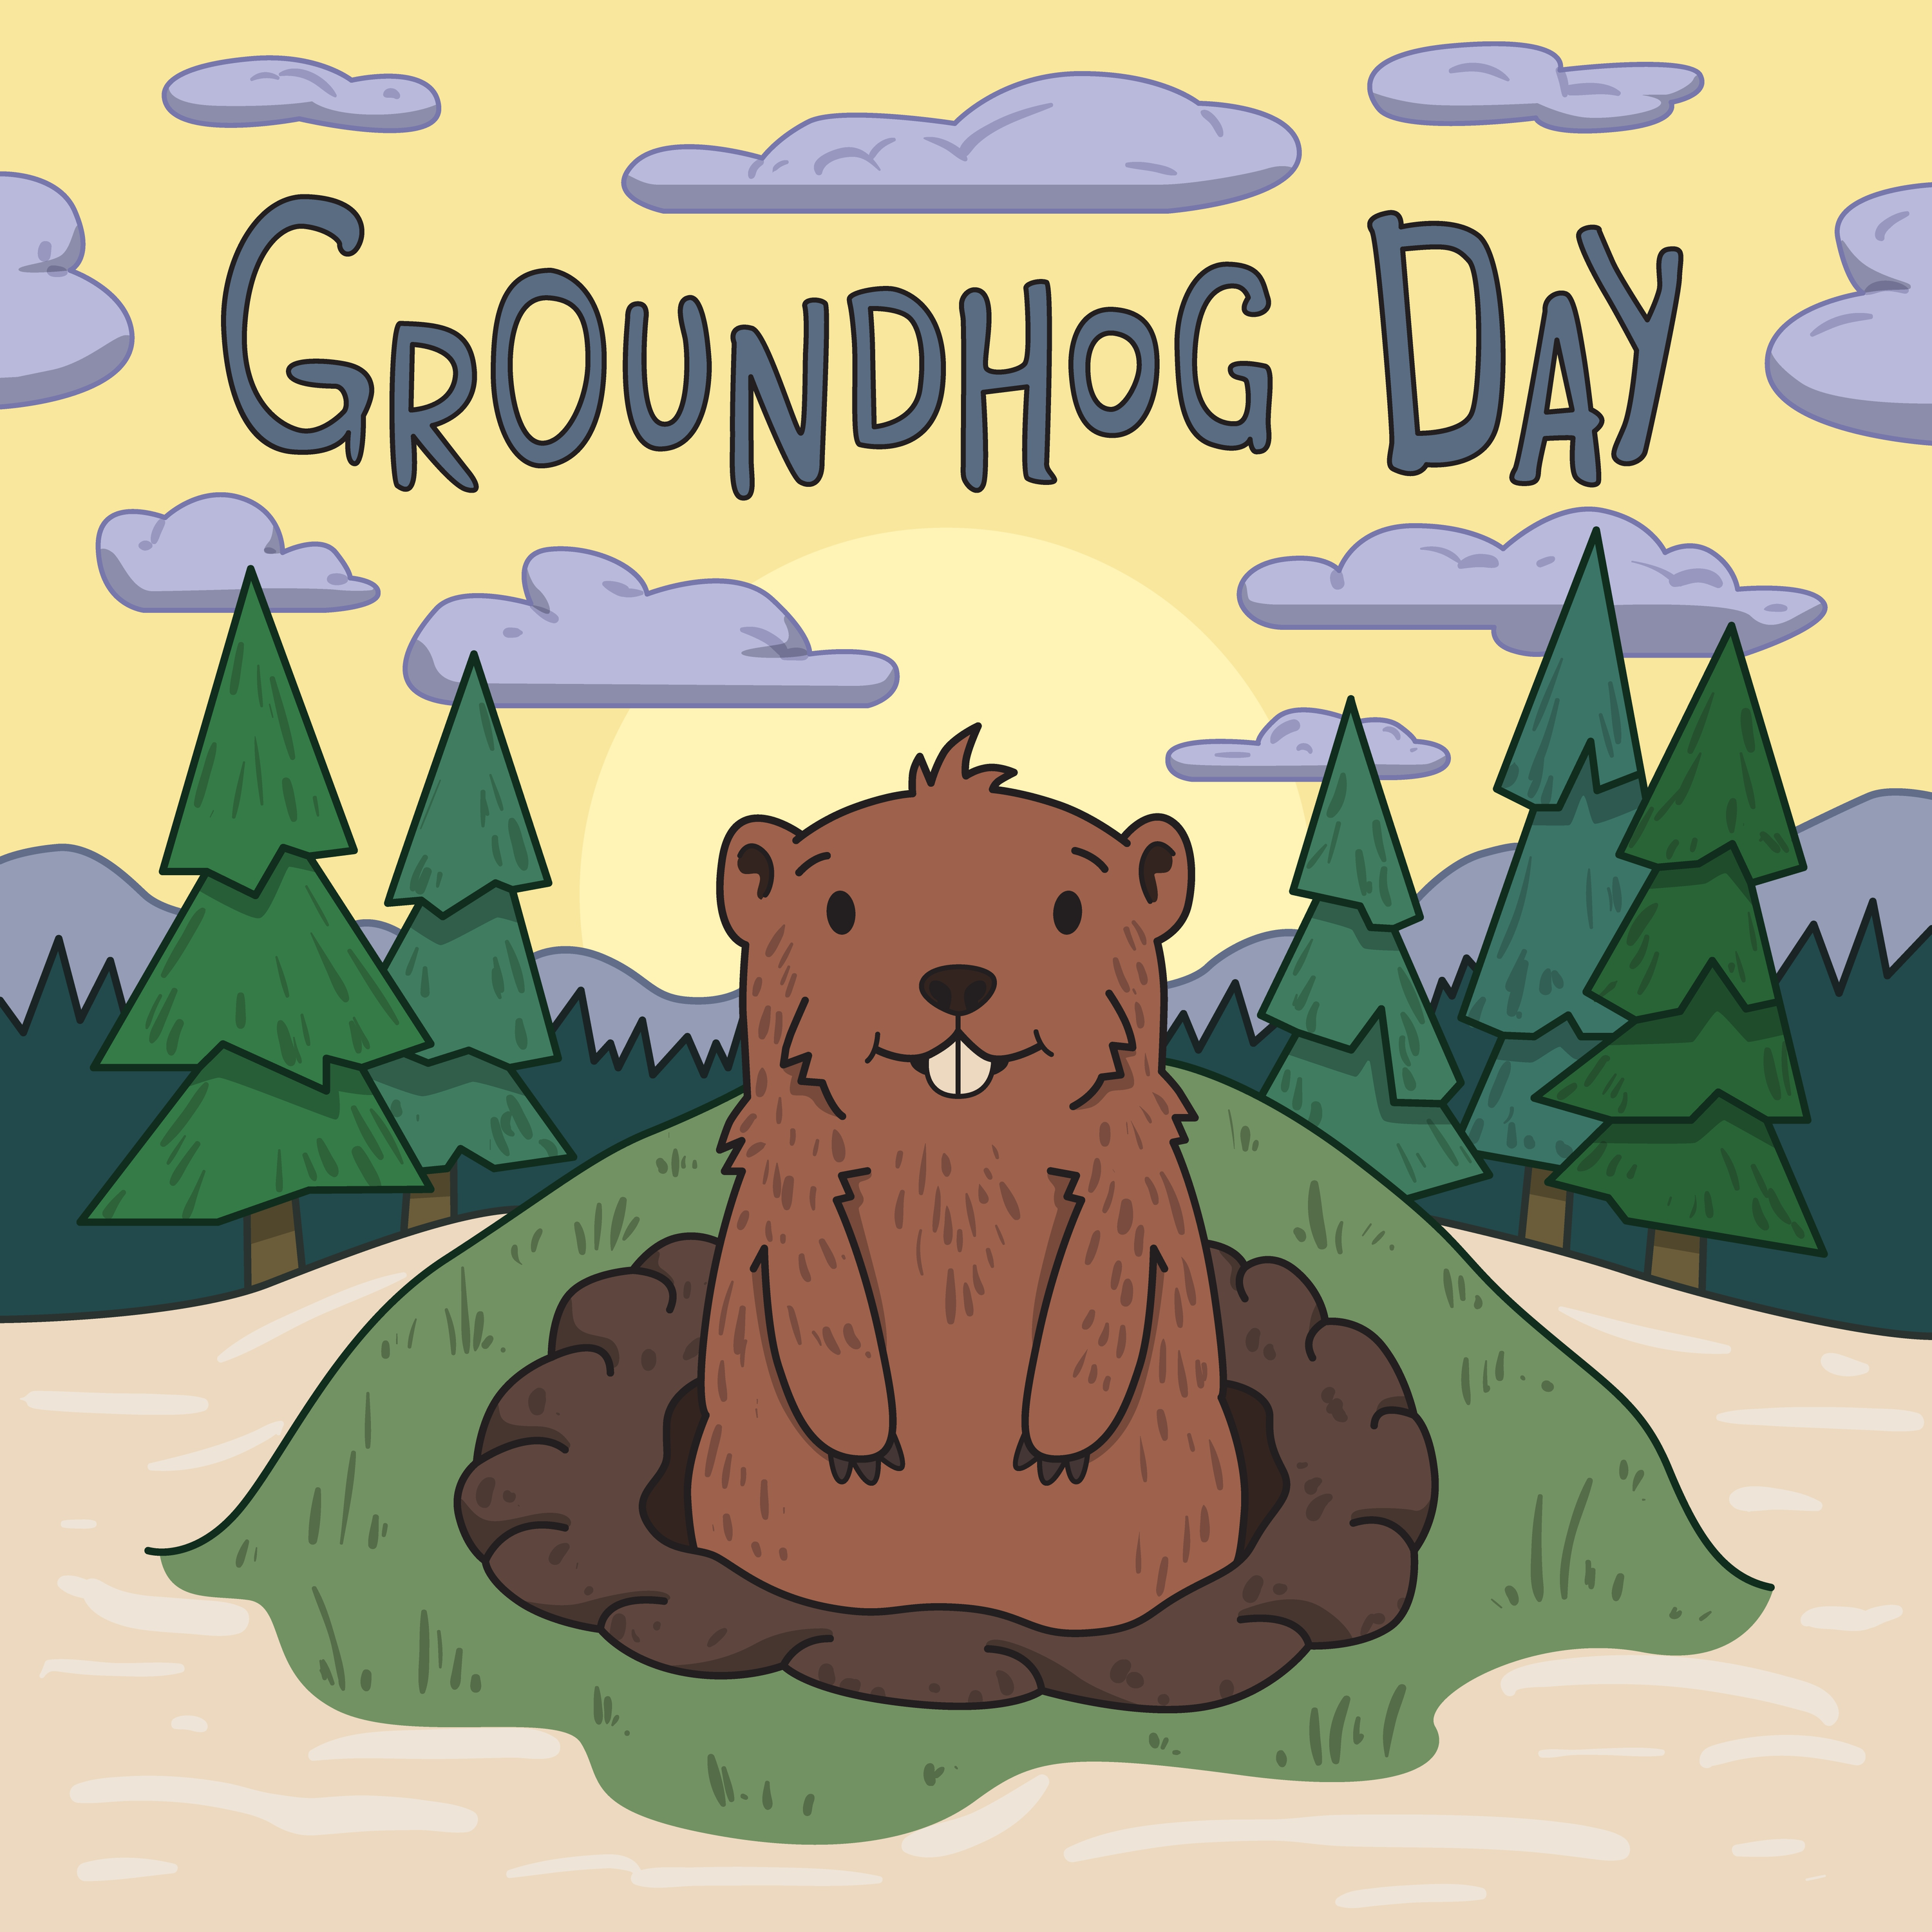 Happy Groundhog Day! Woodstock Willie says spring is coming